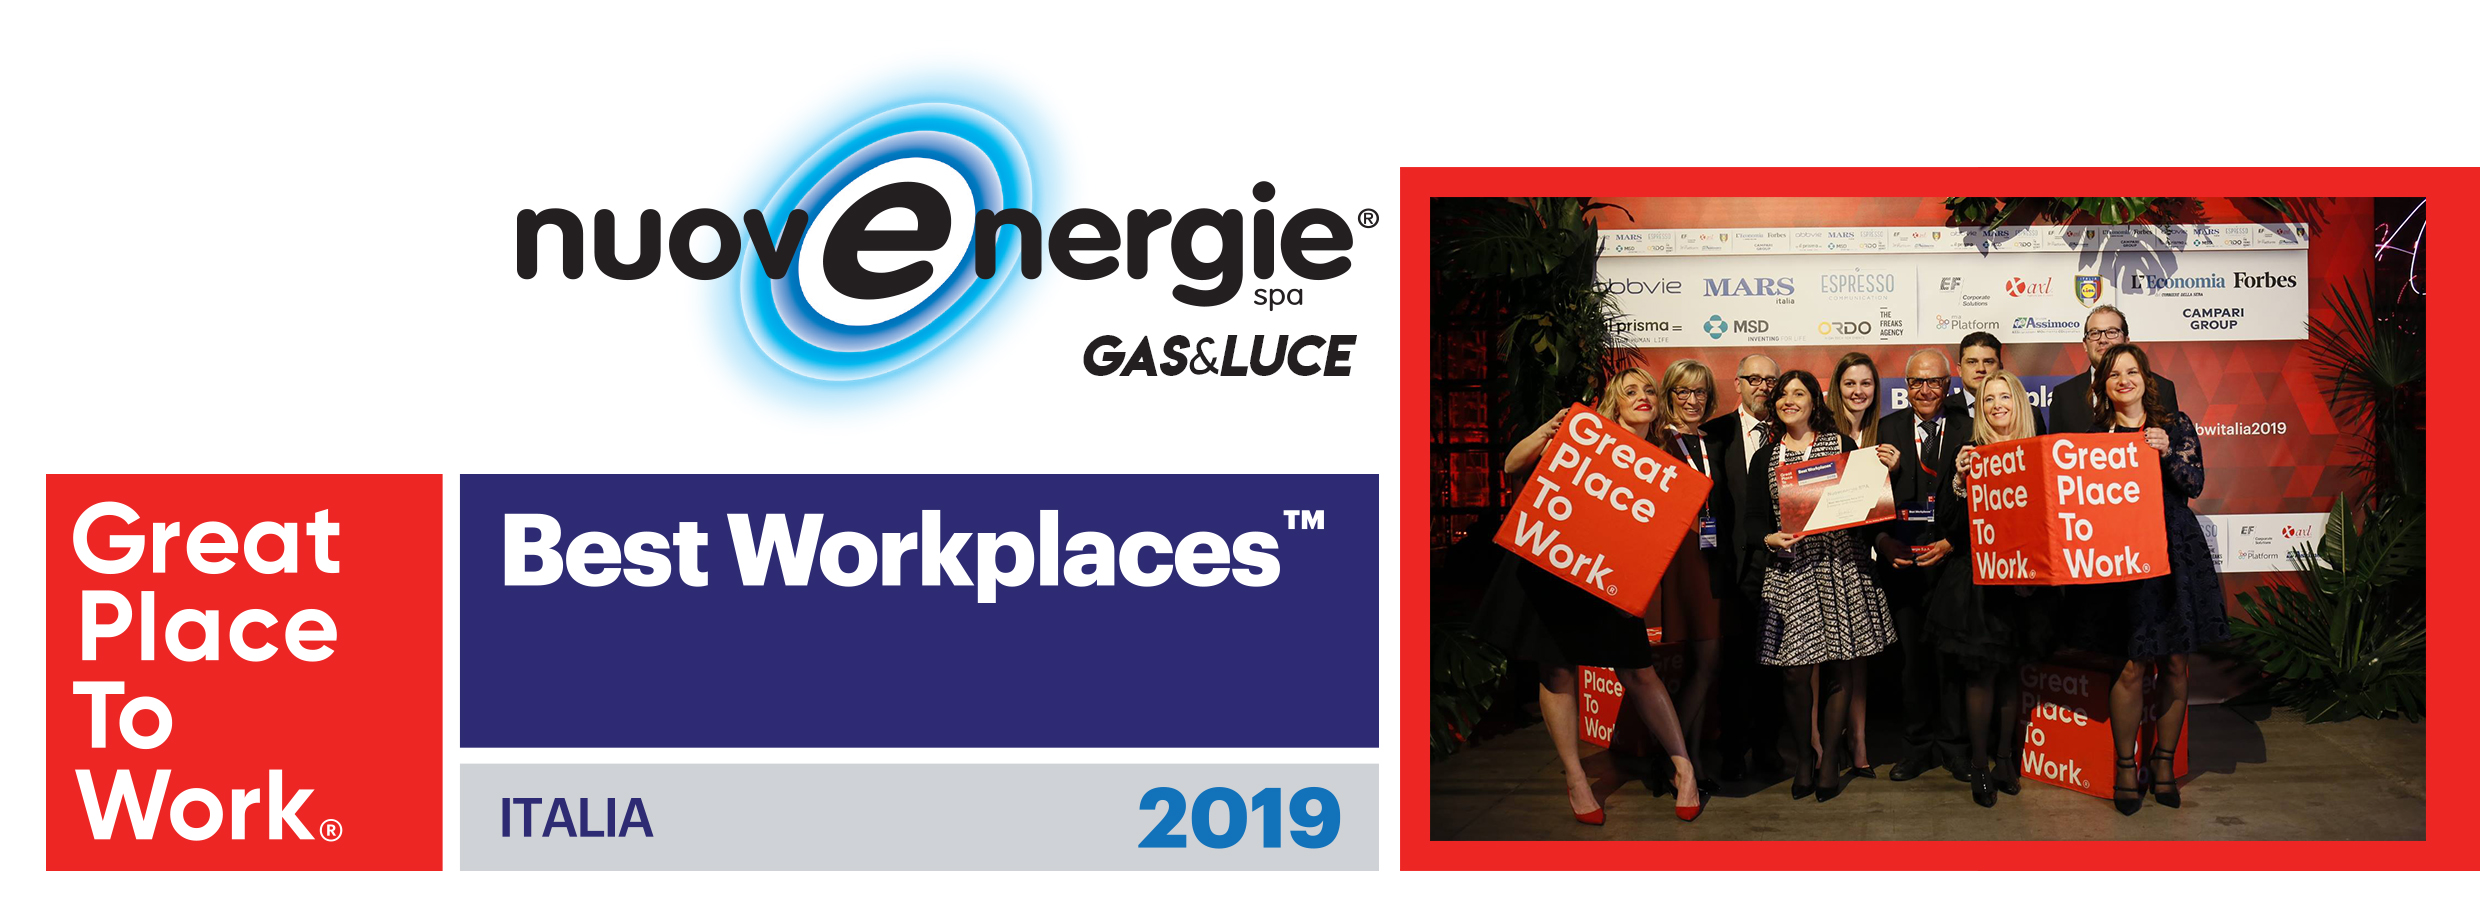 Nuovenergie Best Workplace 2019